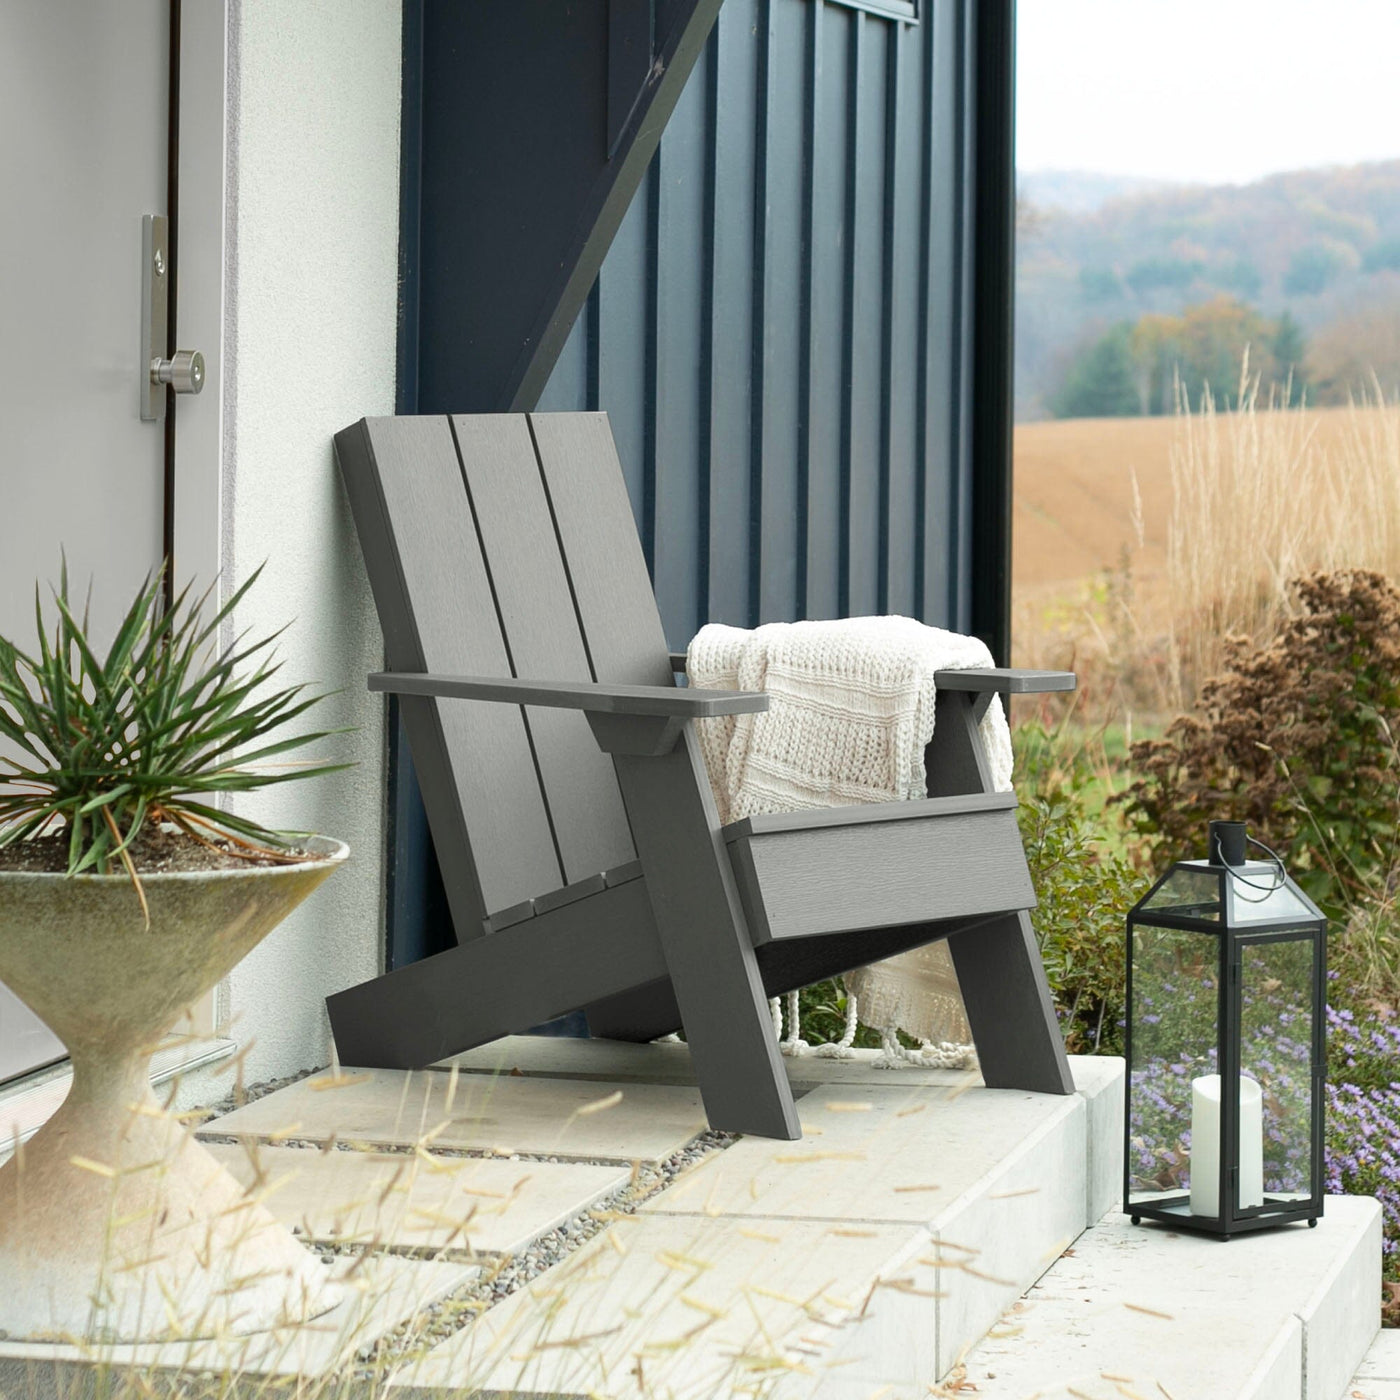 Gray Italica Modern Adirondack chair on porch with blanket and lantern